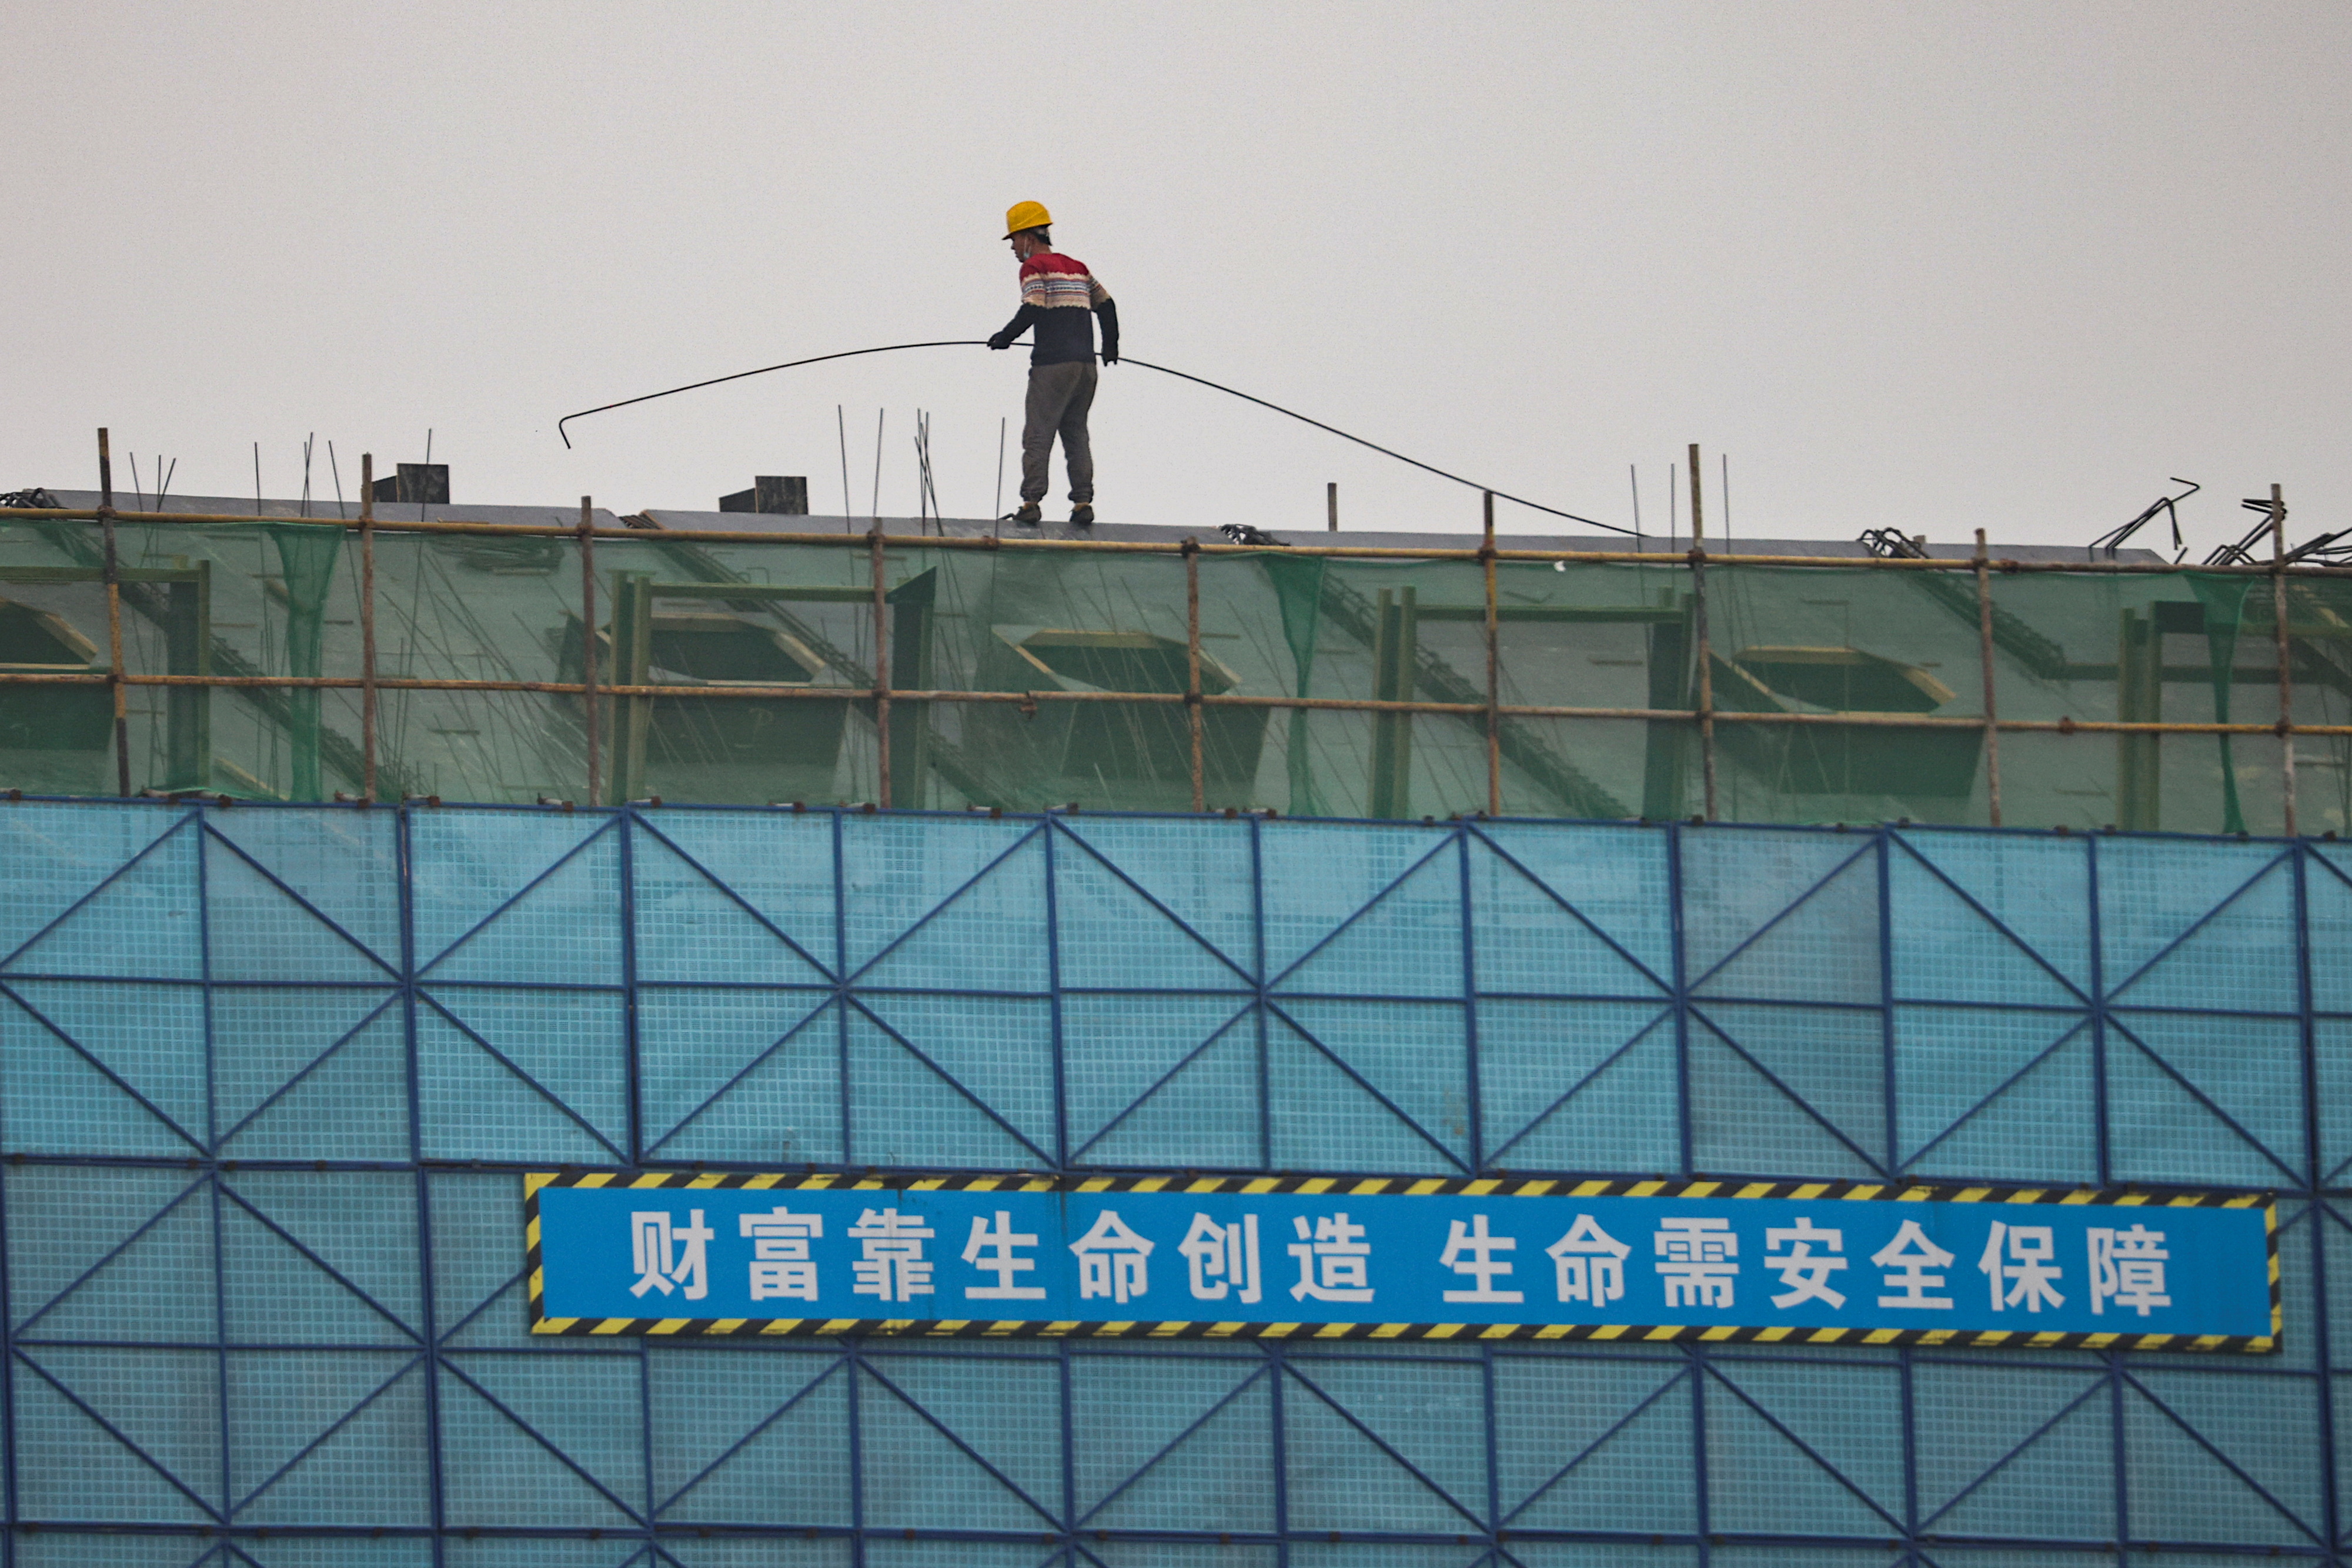 A man walks on a scaffolding at the construction site of the Beijing Xishan Palace apartment complex developed by Kaisa Group Holdings Ltd in Beijing, China, November 5, 2021.  REUTERS/Thomas Peter